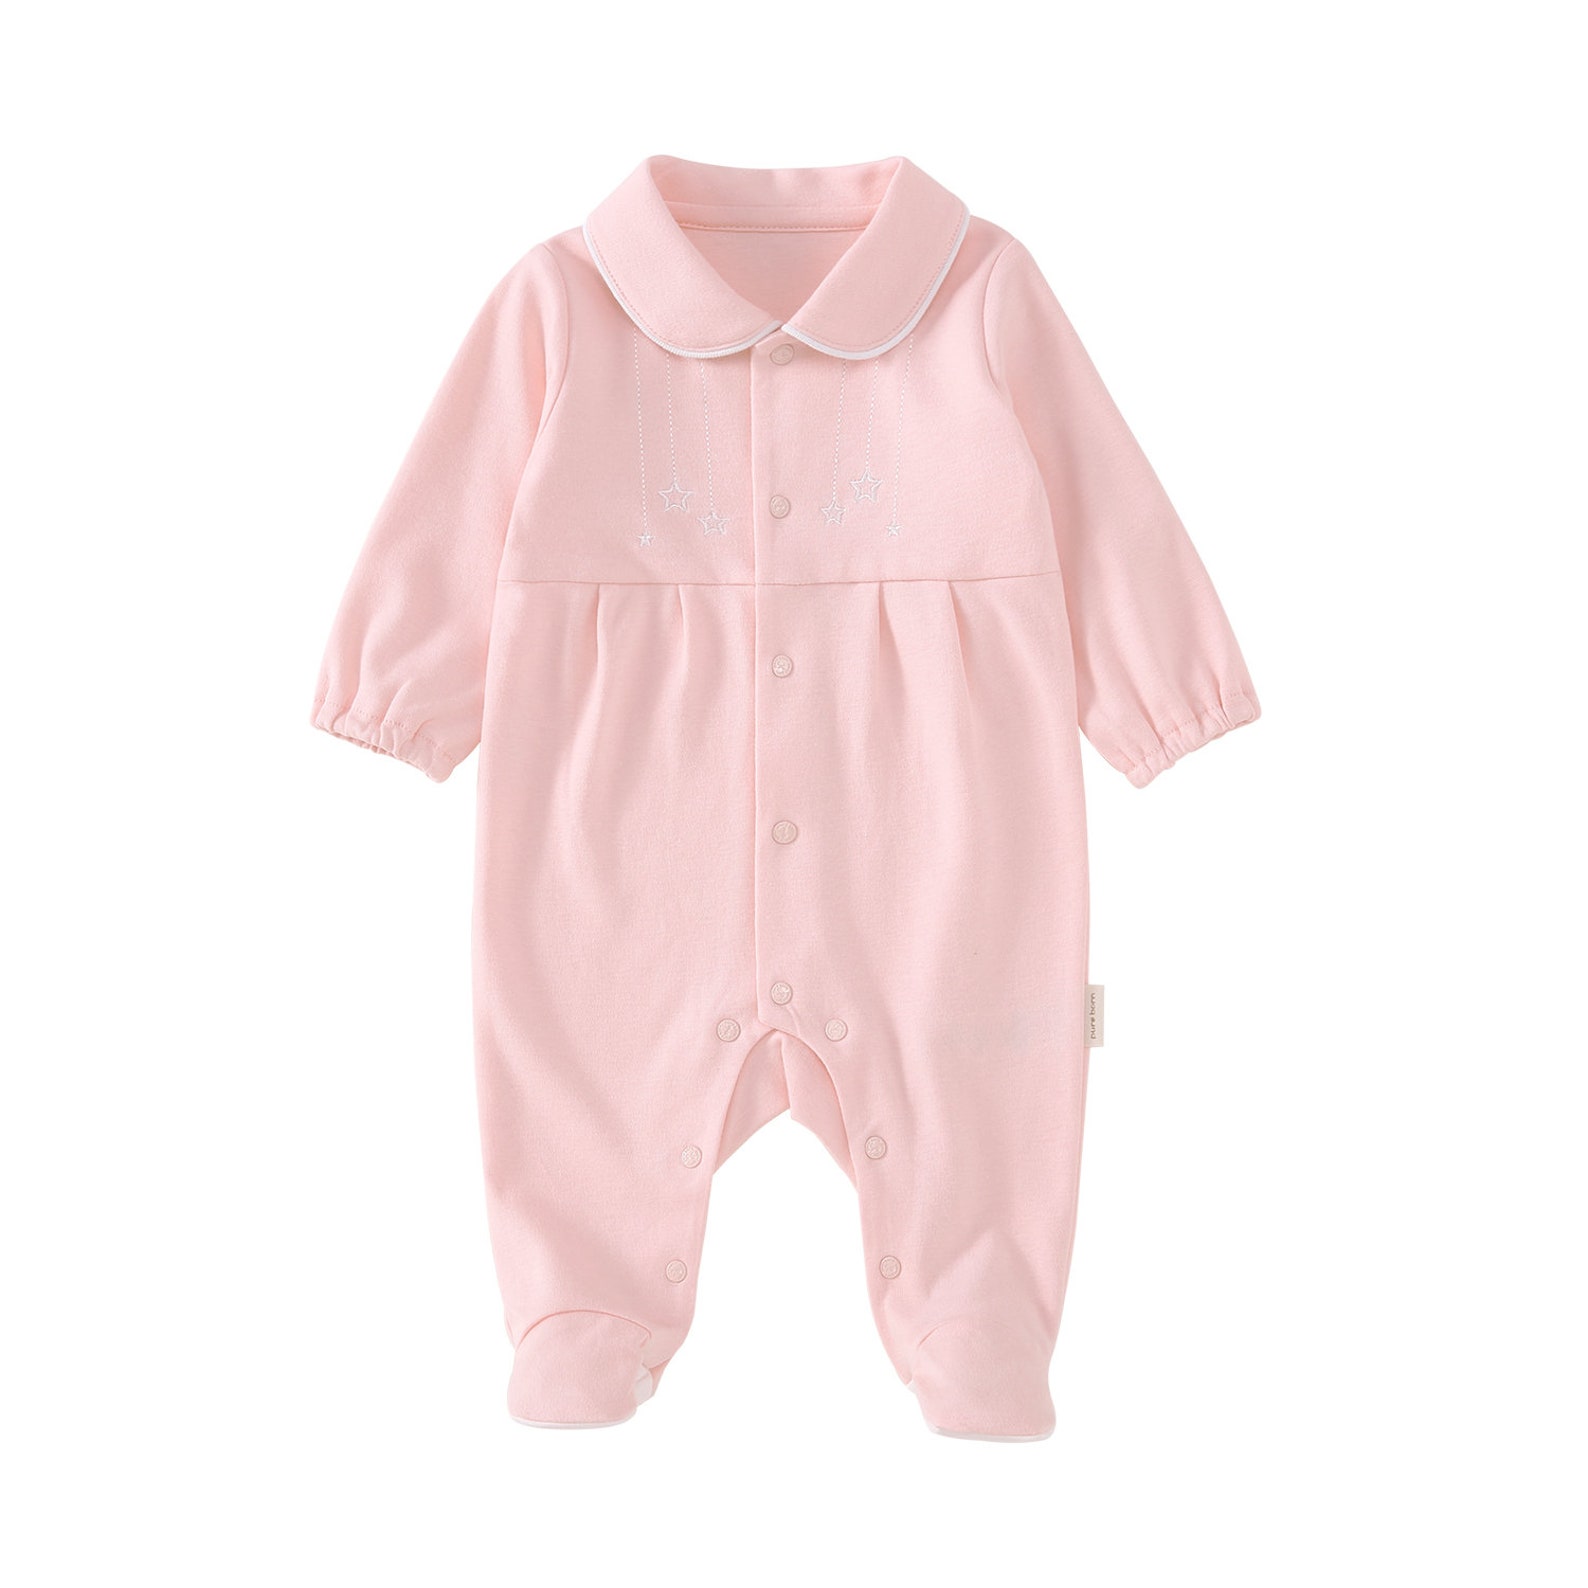 Ultra Soft High Quality Sleep Suits 100% Cotton - Etsy